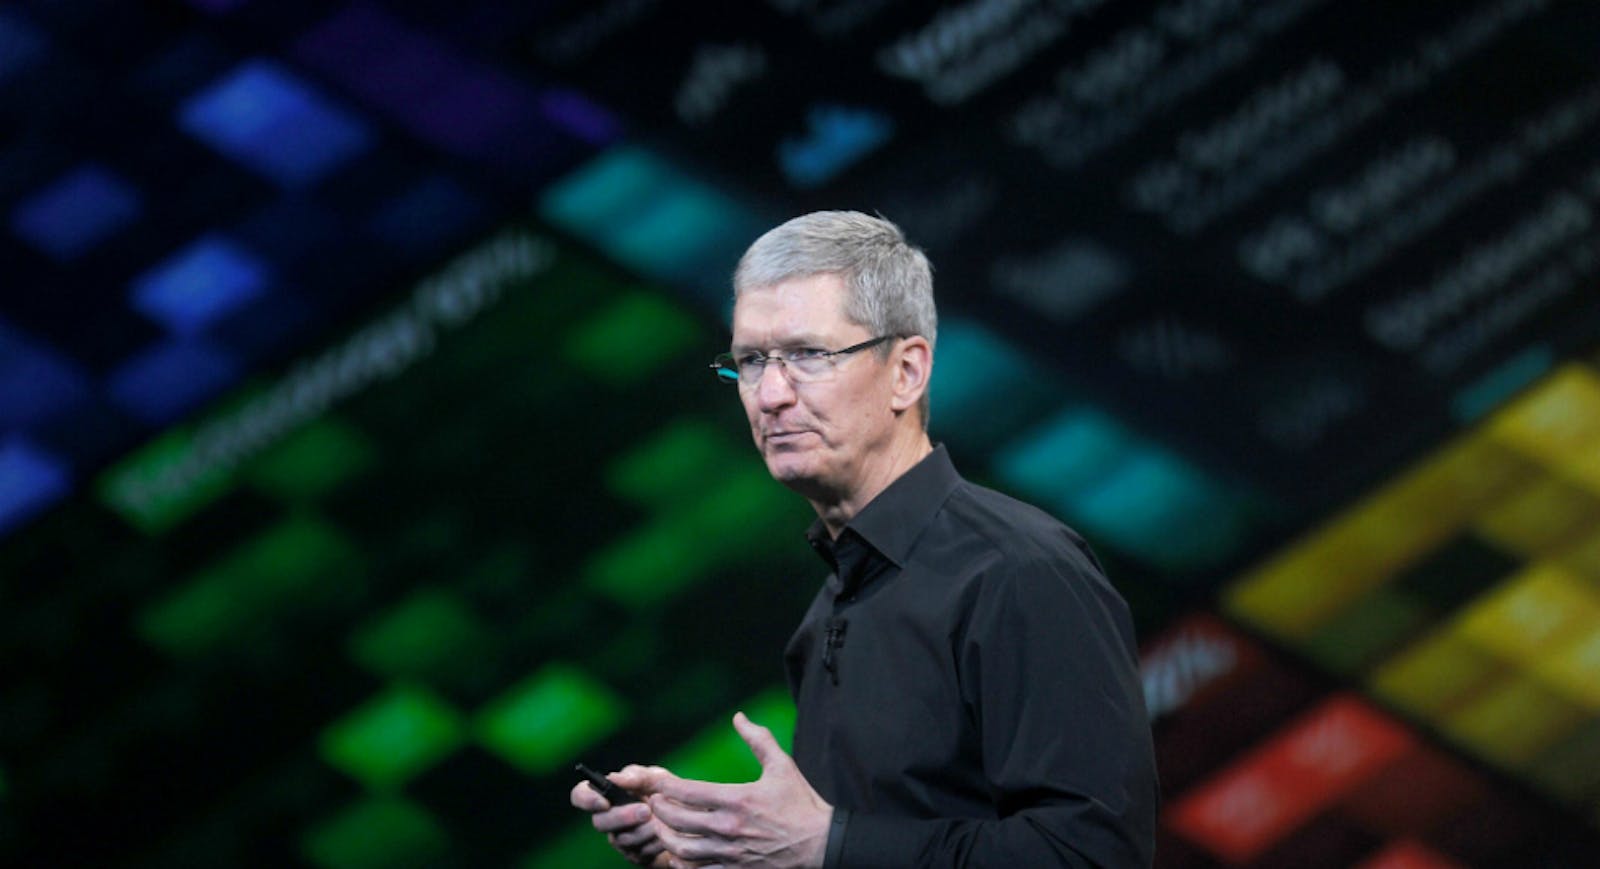 Apple CEO Tim Cook. Photo by Bloomberg.